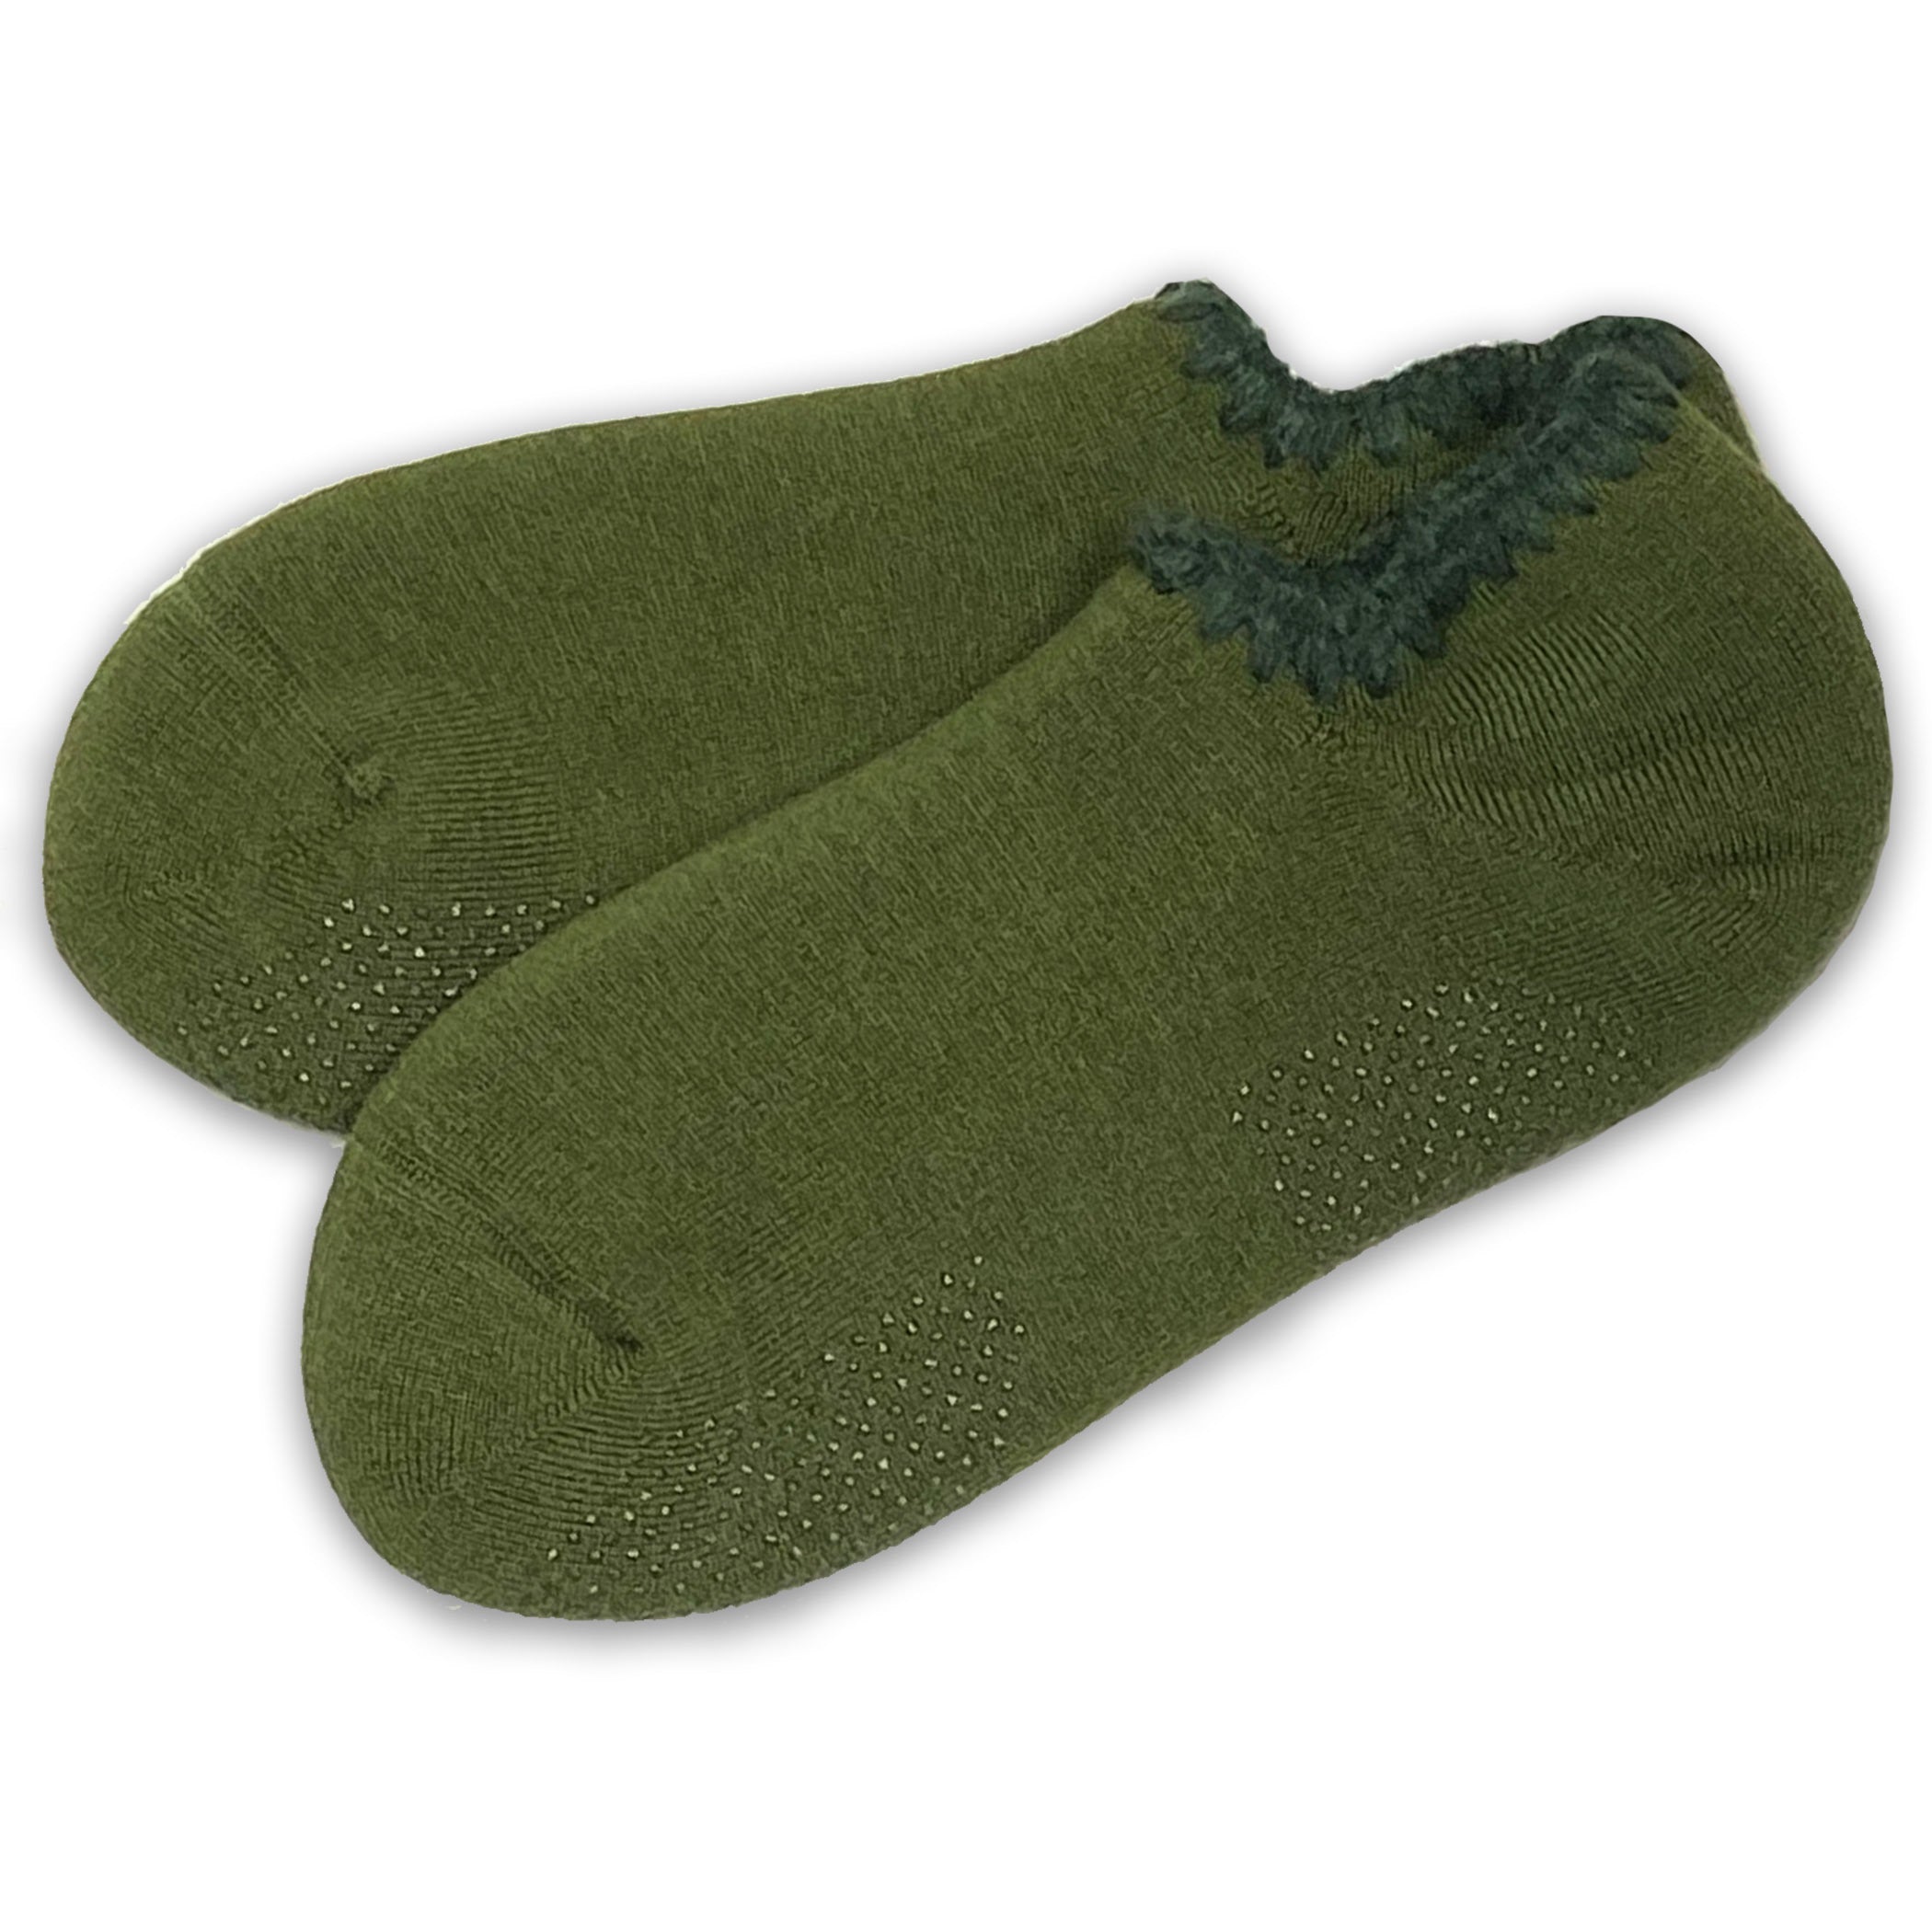 CHERRYSTONE® Slipper Socks with Grips | Size Large | *NEW!* Forest Green - CHERRYSTONE by MARKET TO JAPAN LLC